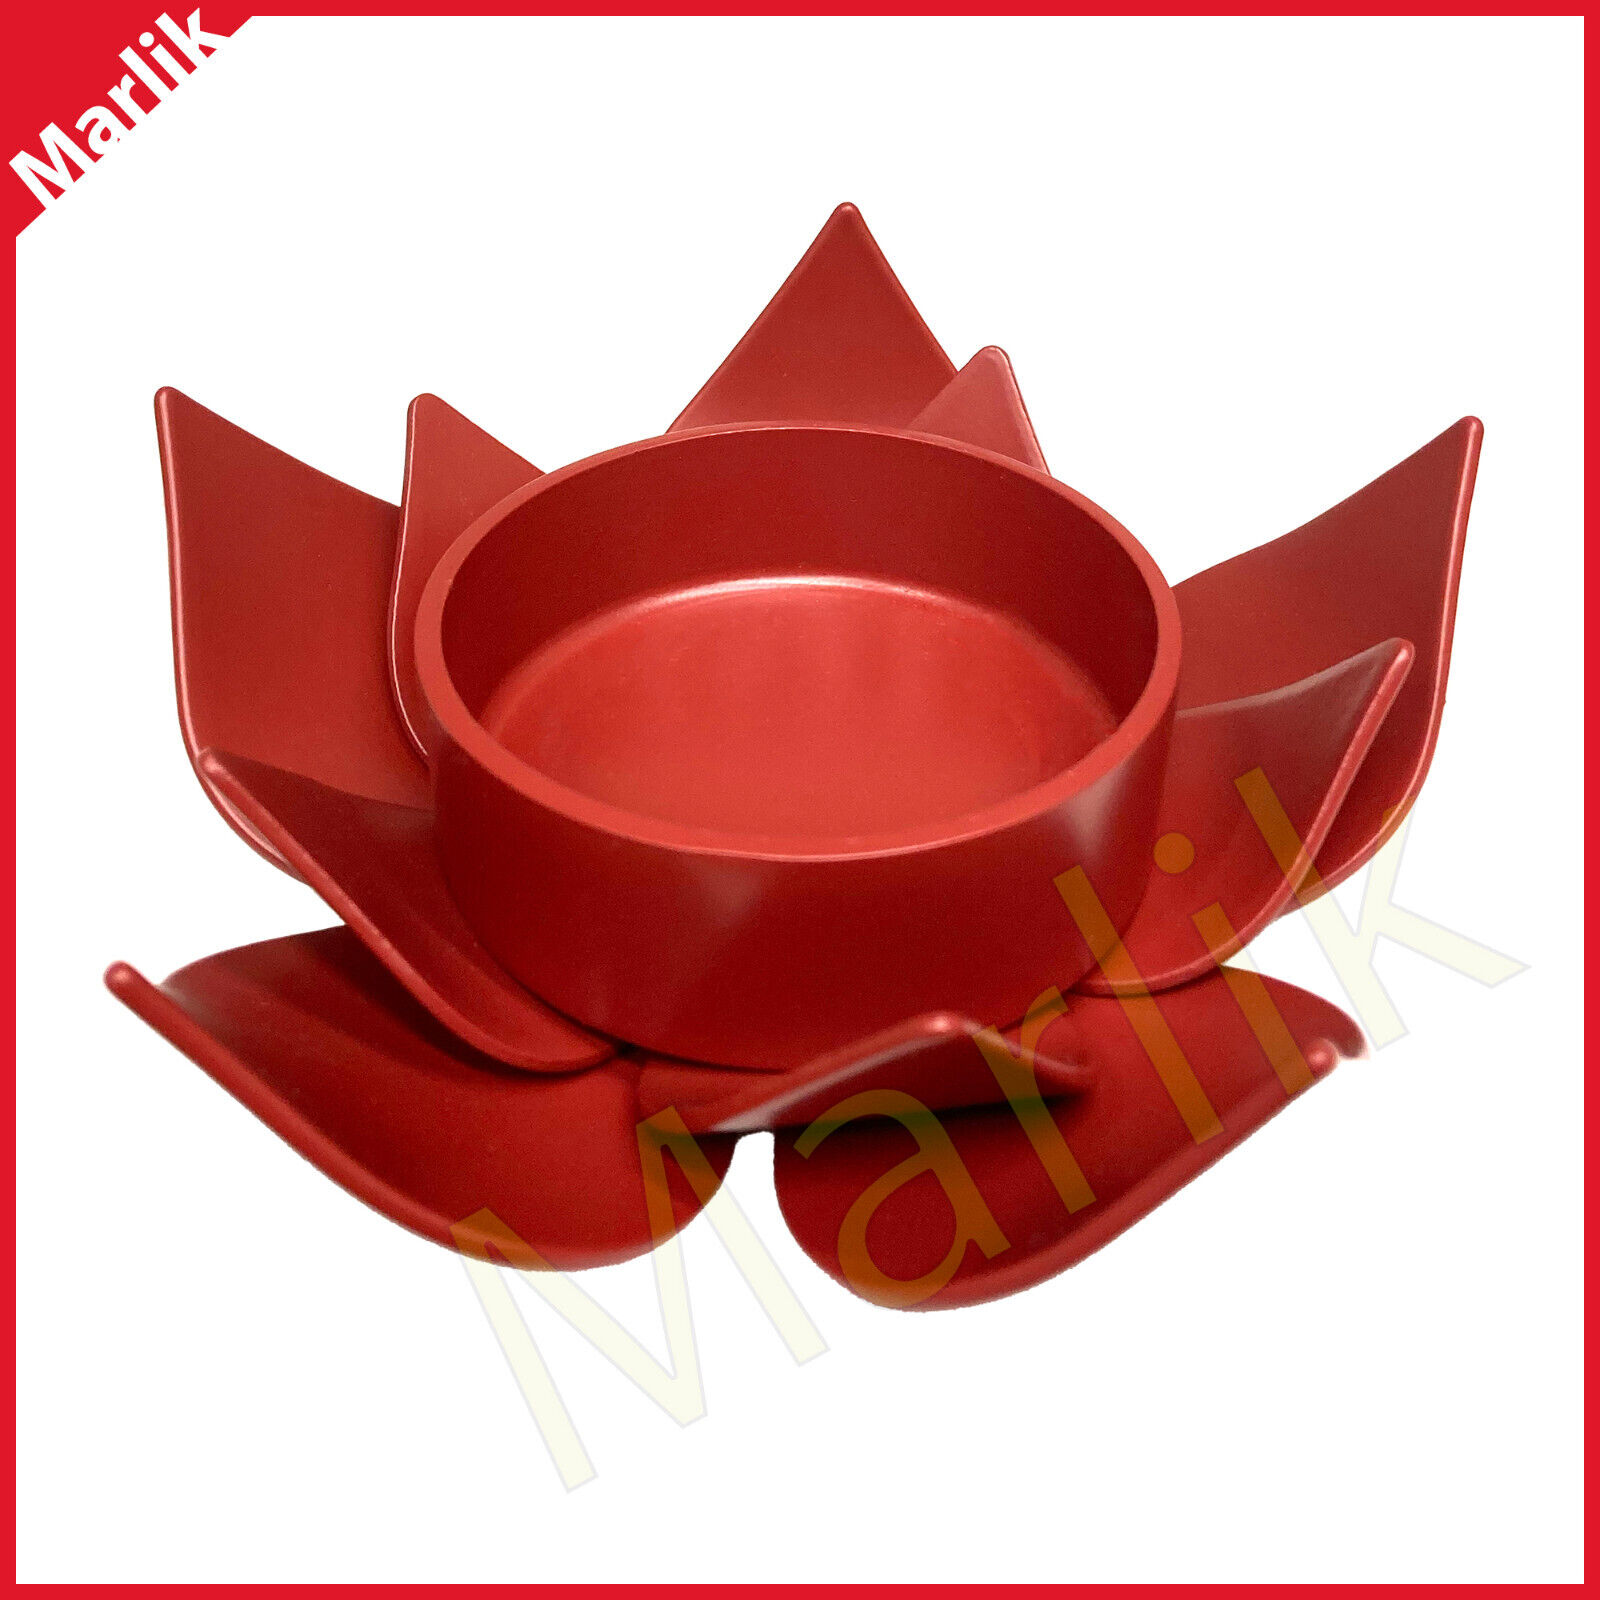 Ikea AROMATISK Decorative Candle/Tealight Holder LOTUS, Metal, Red, NEW